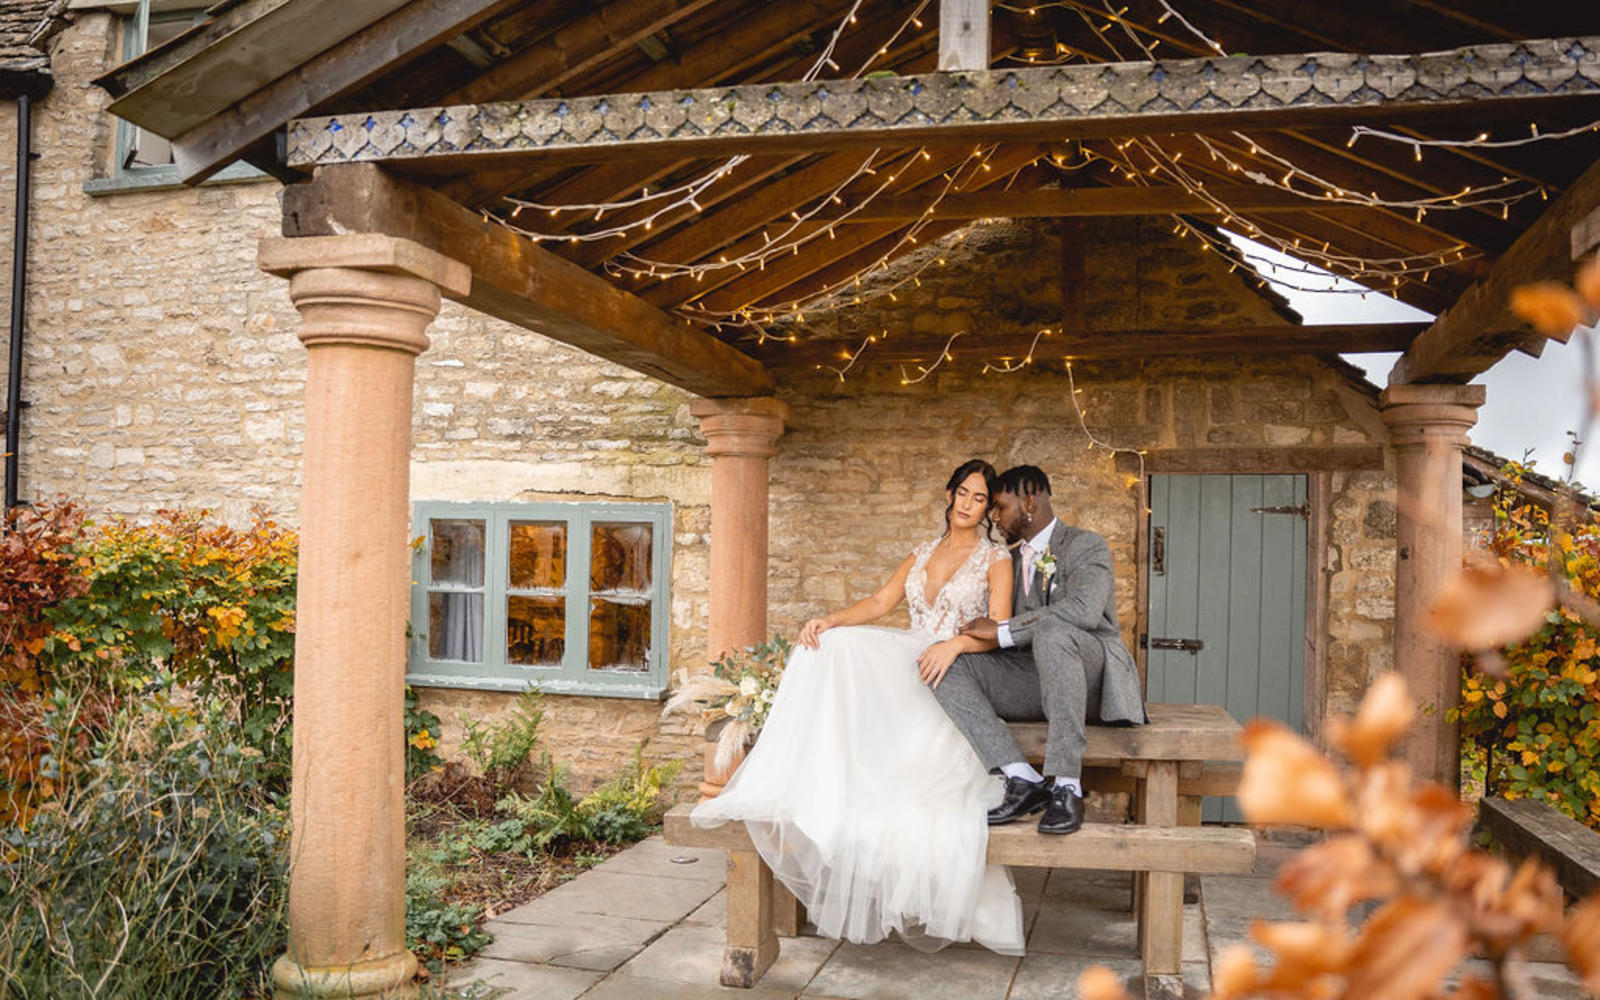 Embrace the Warmth of Love: Cozy Wedding at The Old Lodge